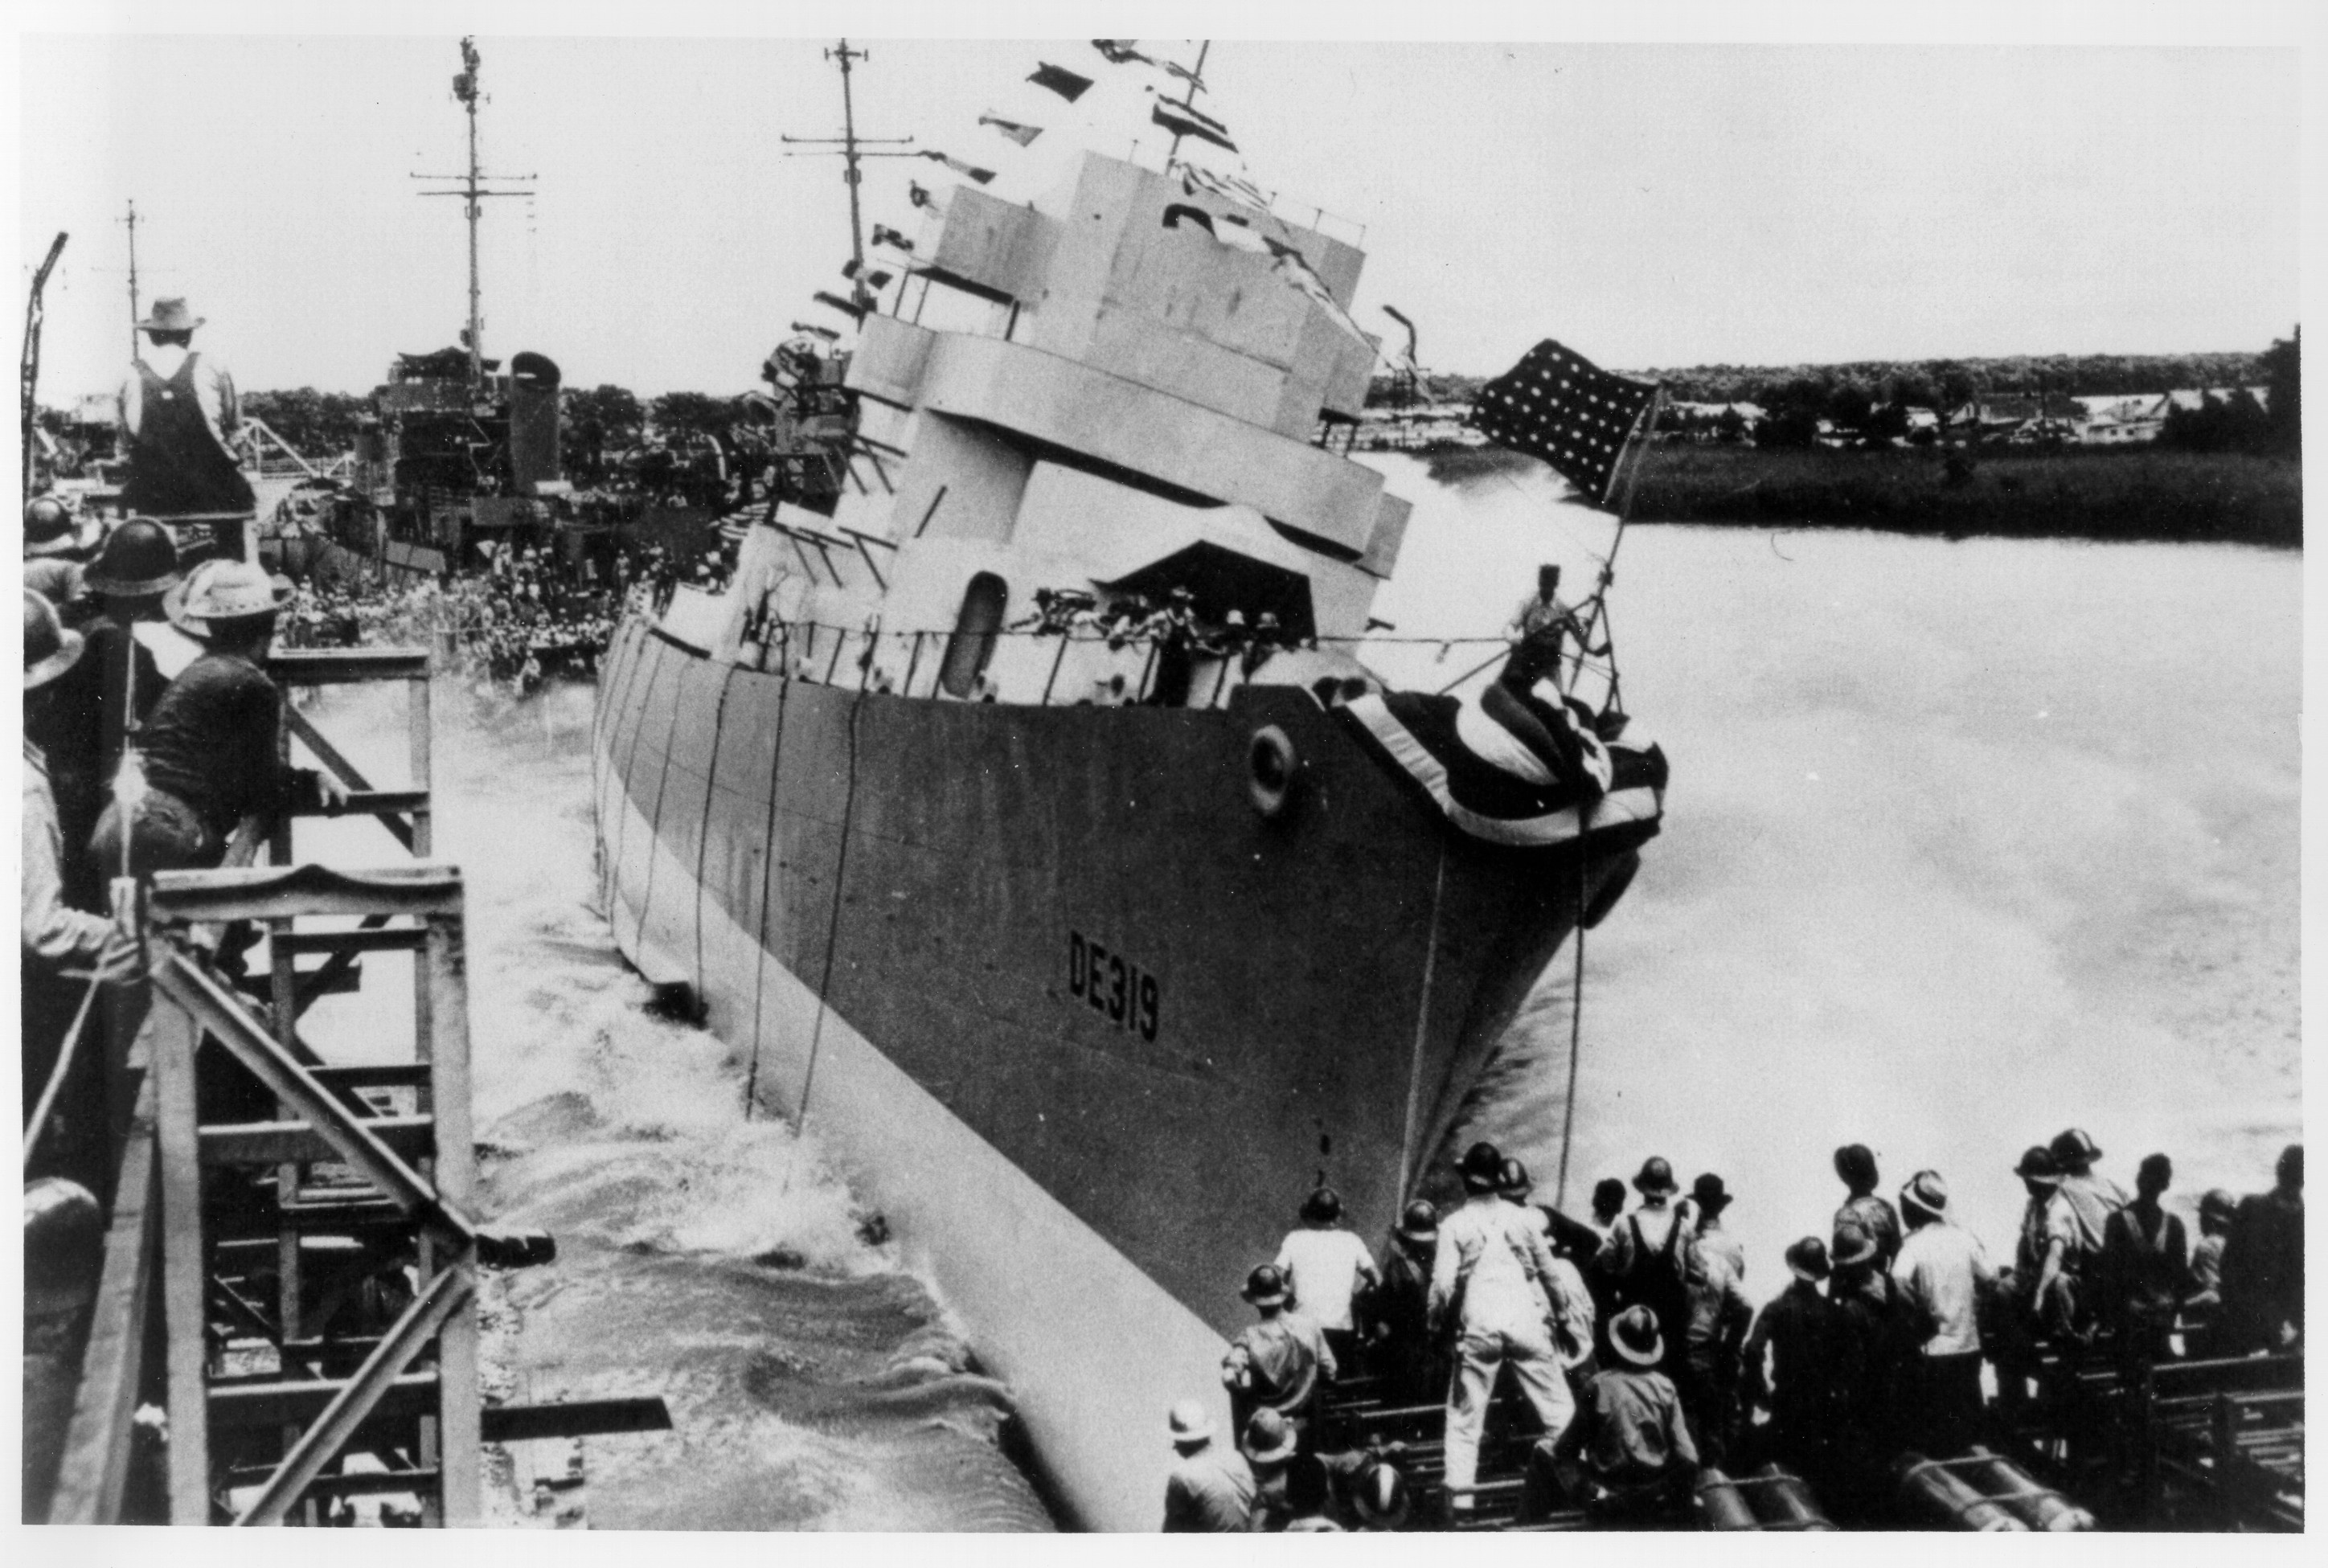 Launching of USS Leopold, March 1943